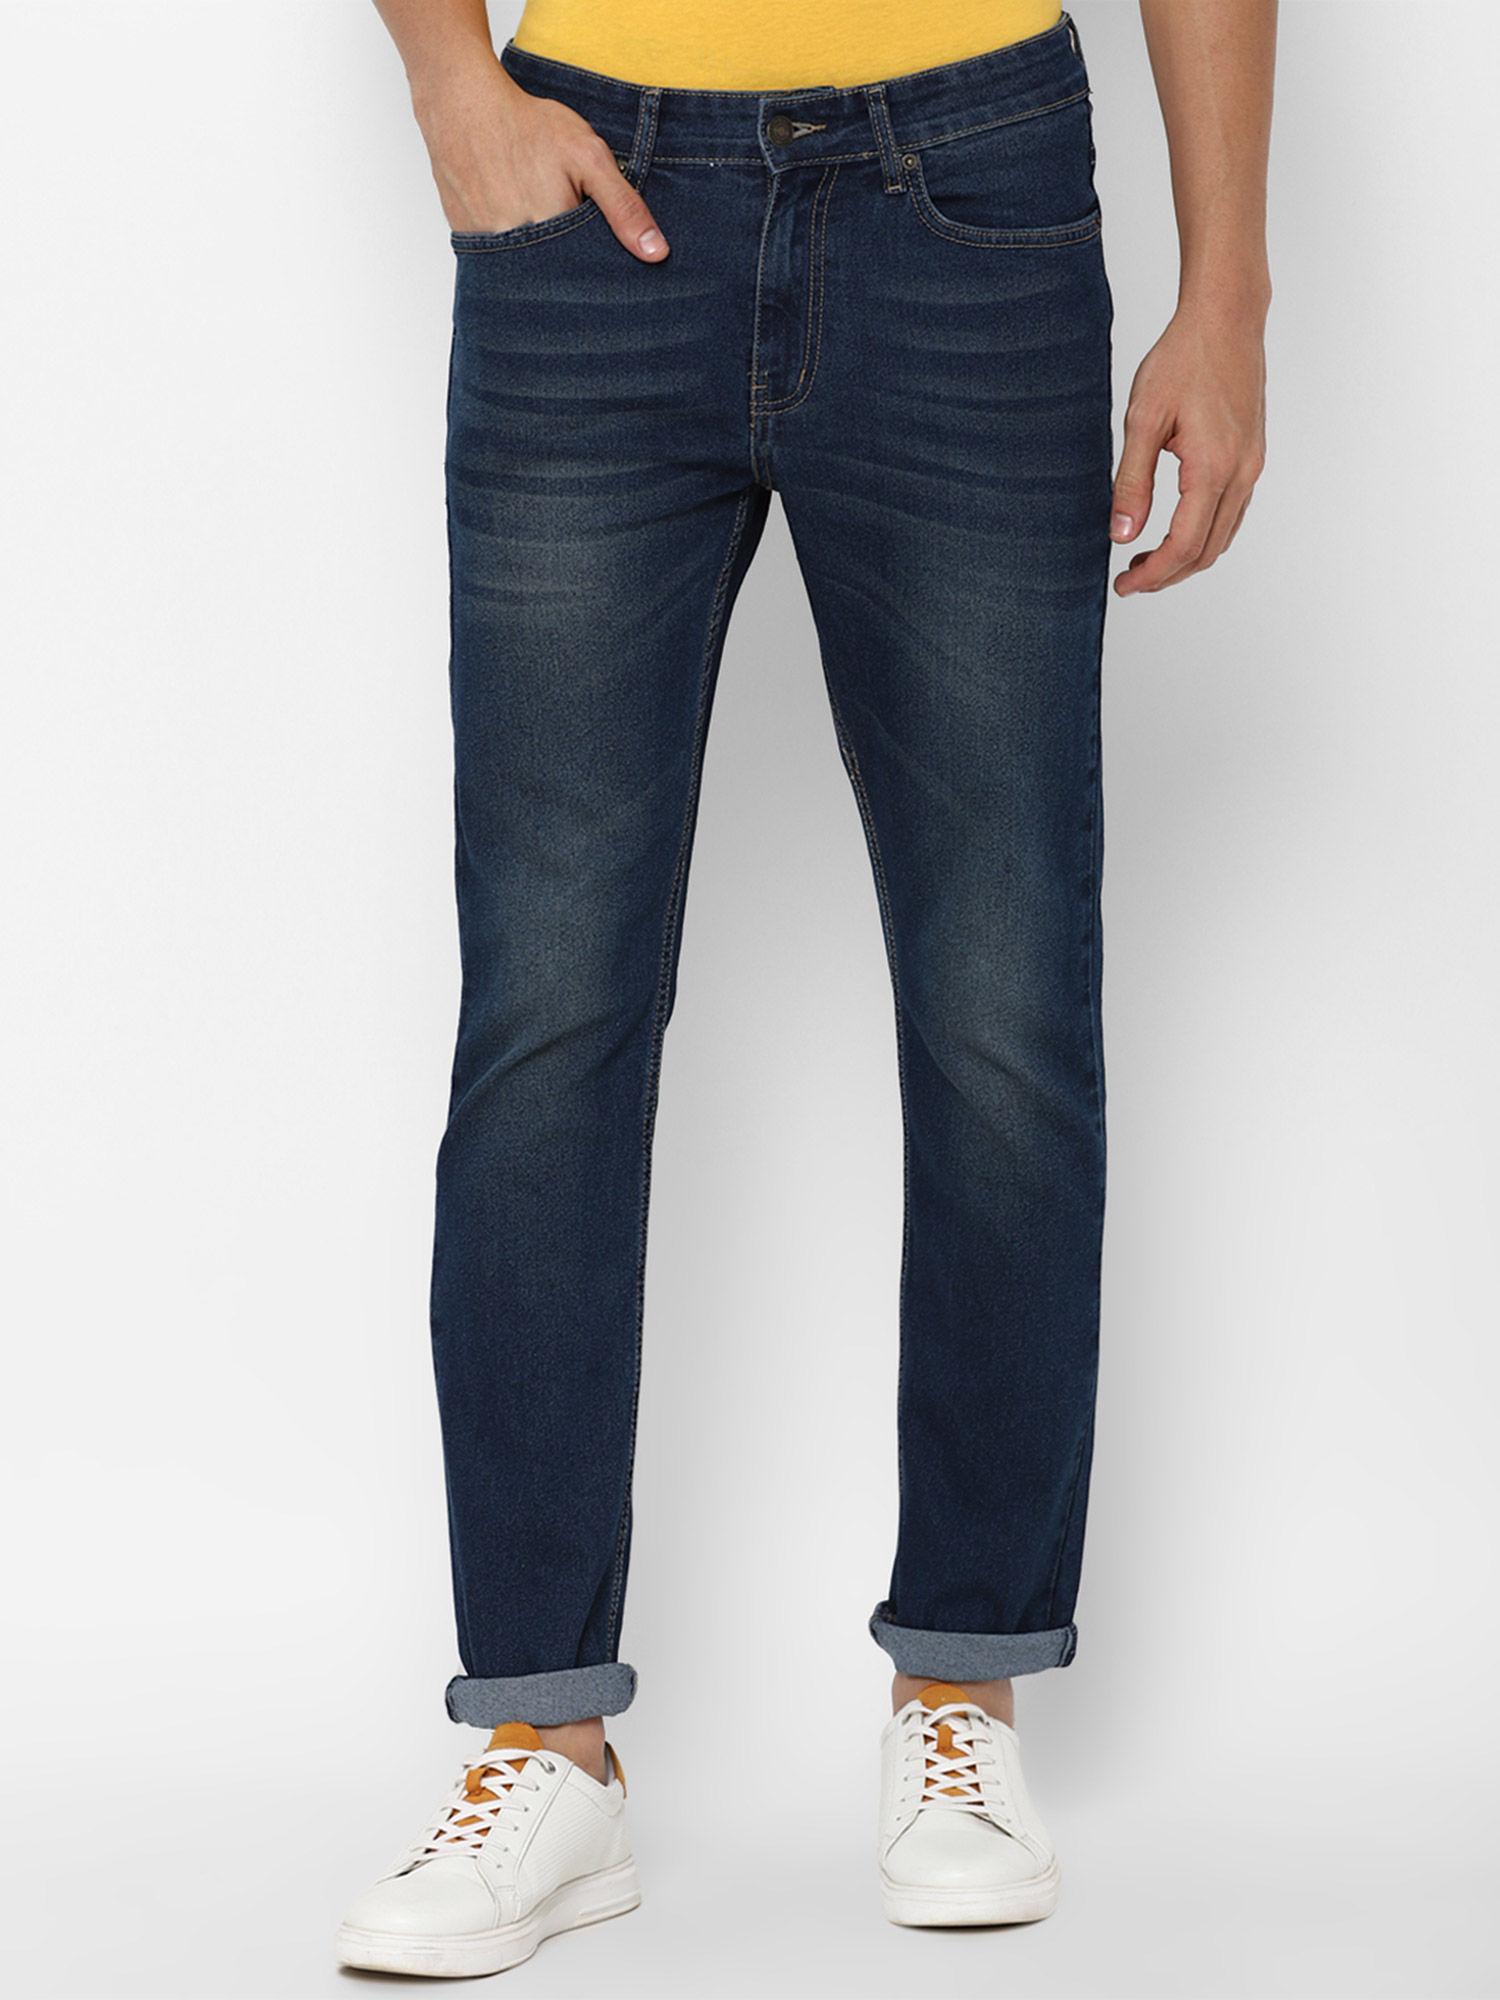 blue-solid-jeans